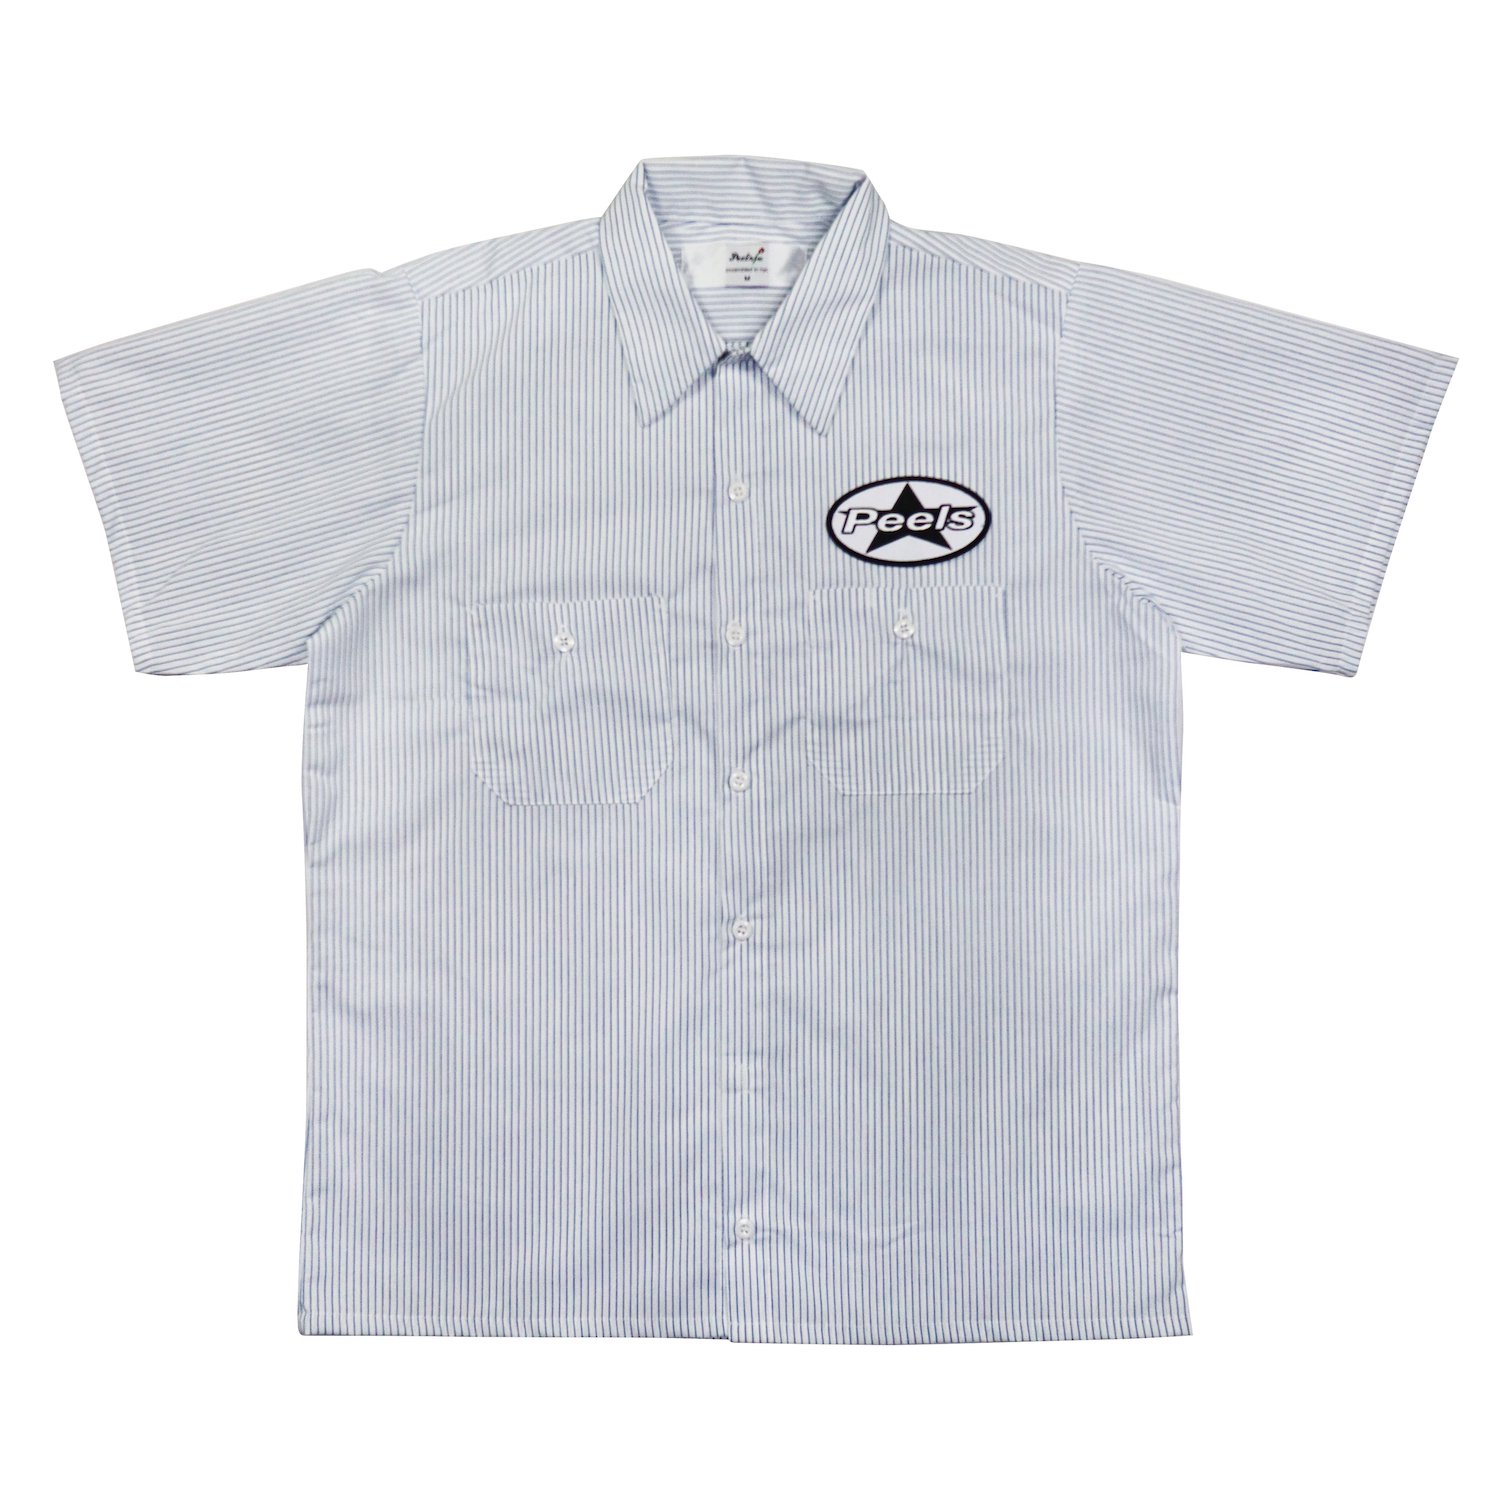 Peels<br>OG Striped Work Shirt with Star Patch<br>